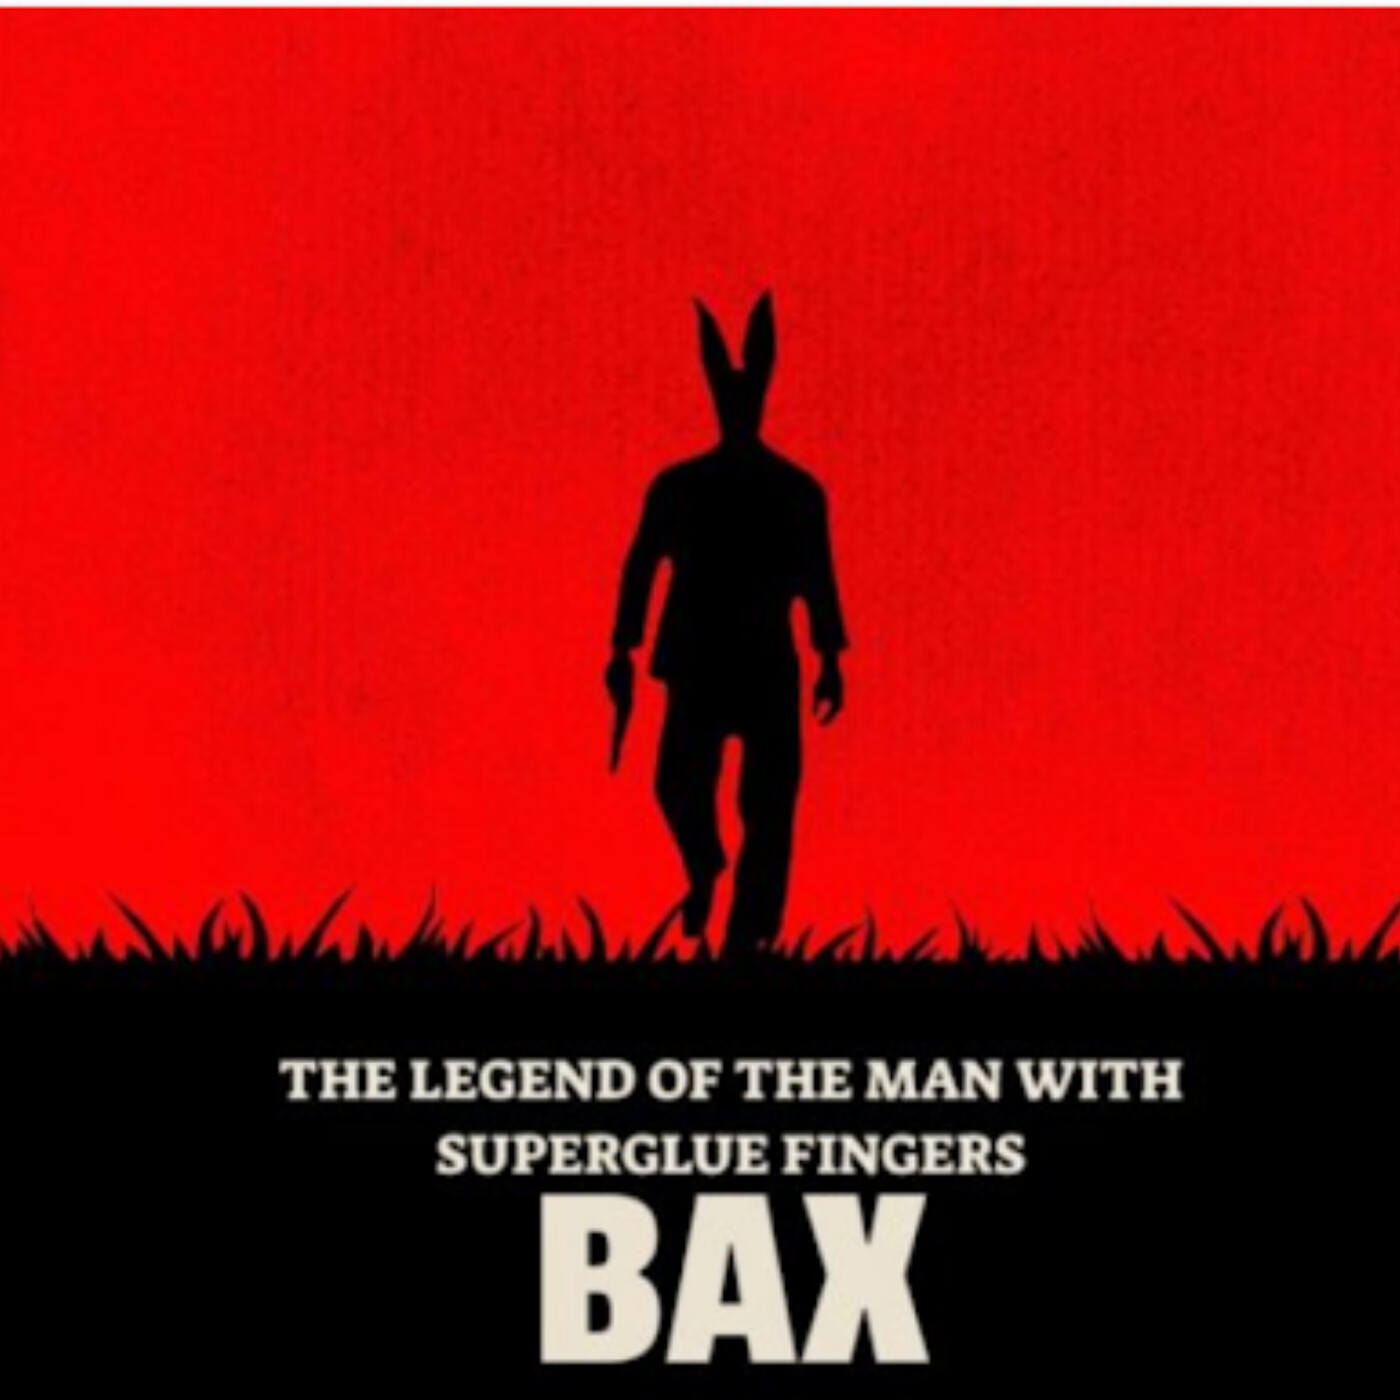 Bax - The legend of the man with superglue fingers